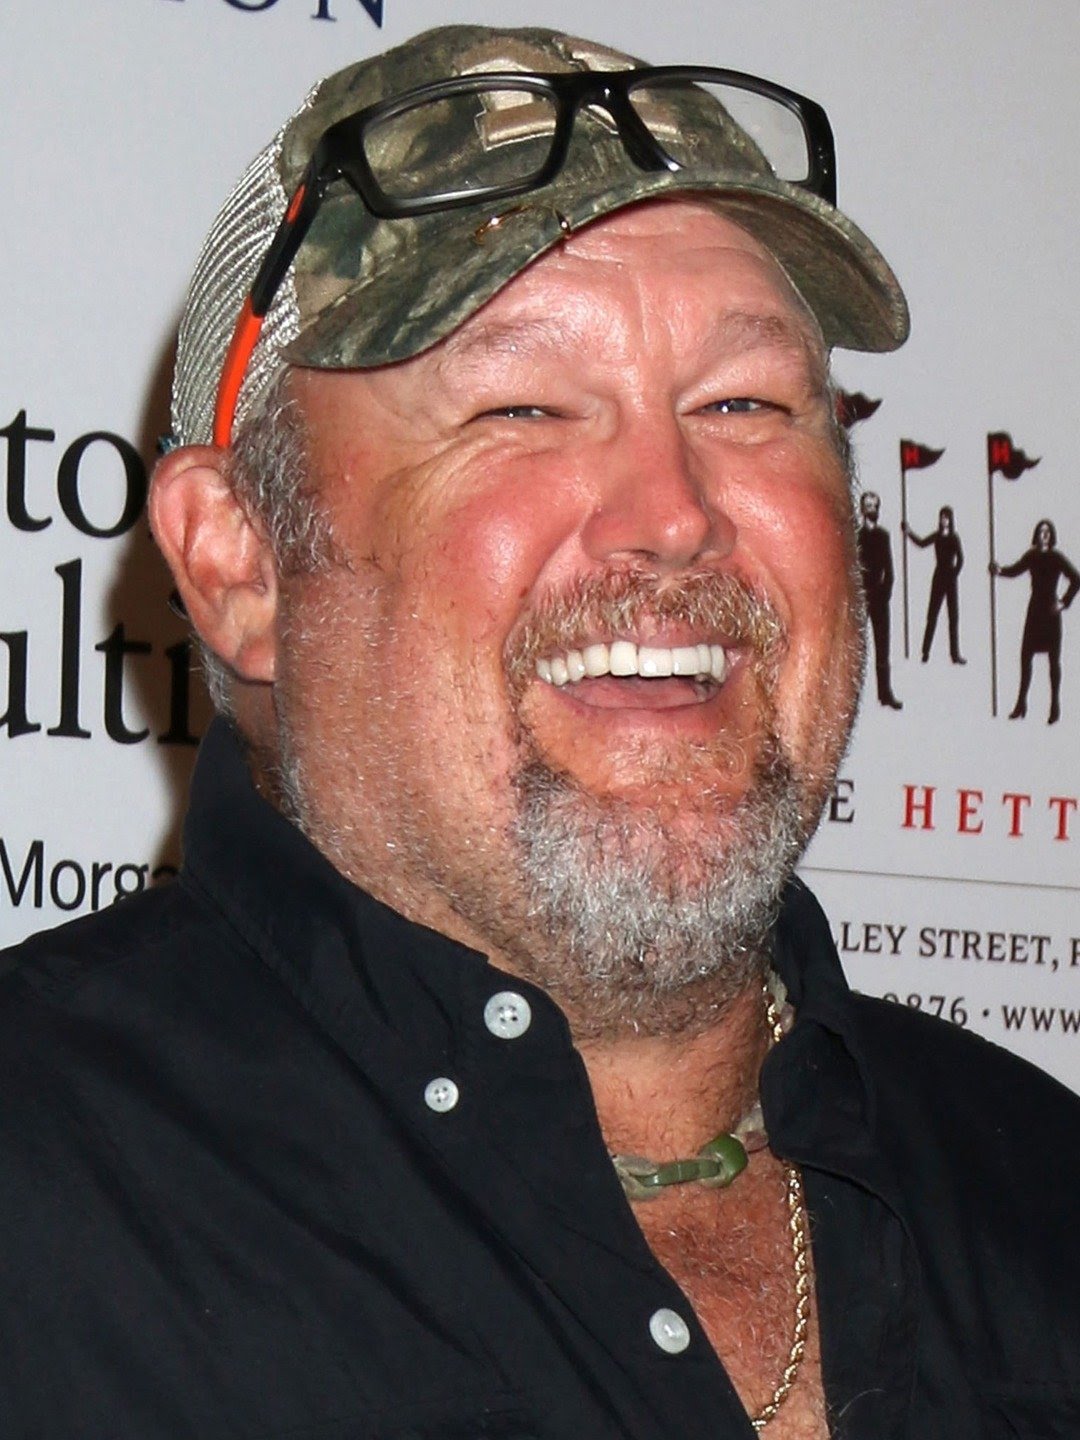 Where Does Larry The Cable Guy Currently Live Larry the Cable Guy 2022: Wife, net worth, tattoos, smoking & body